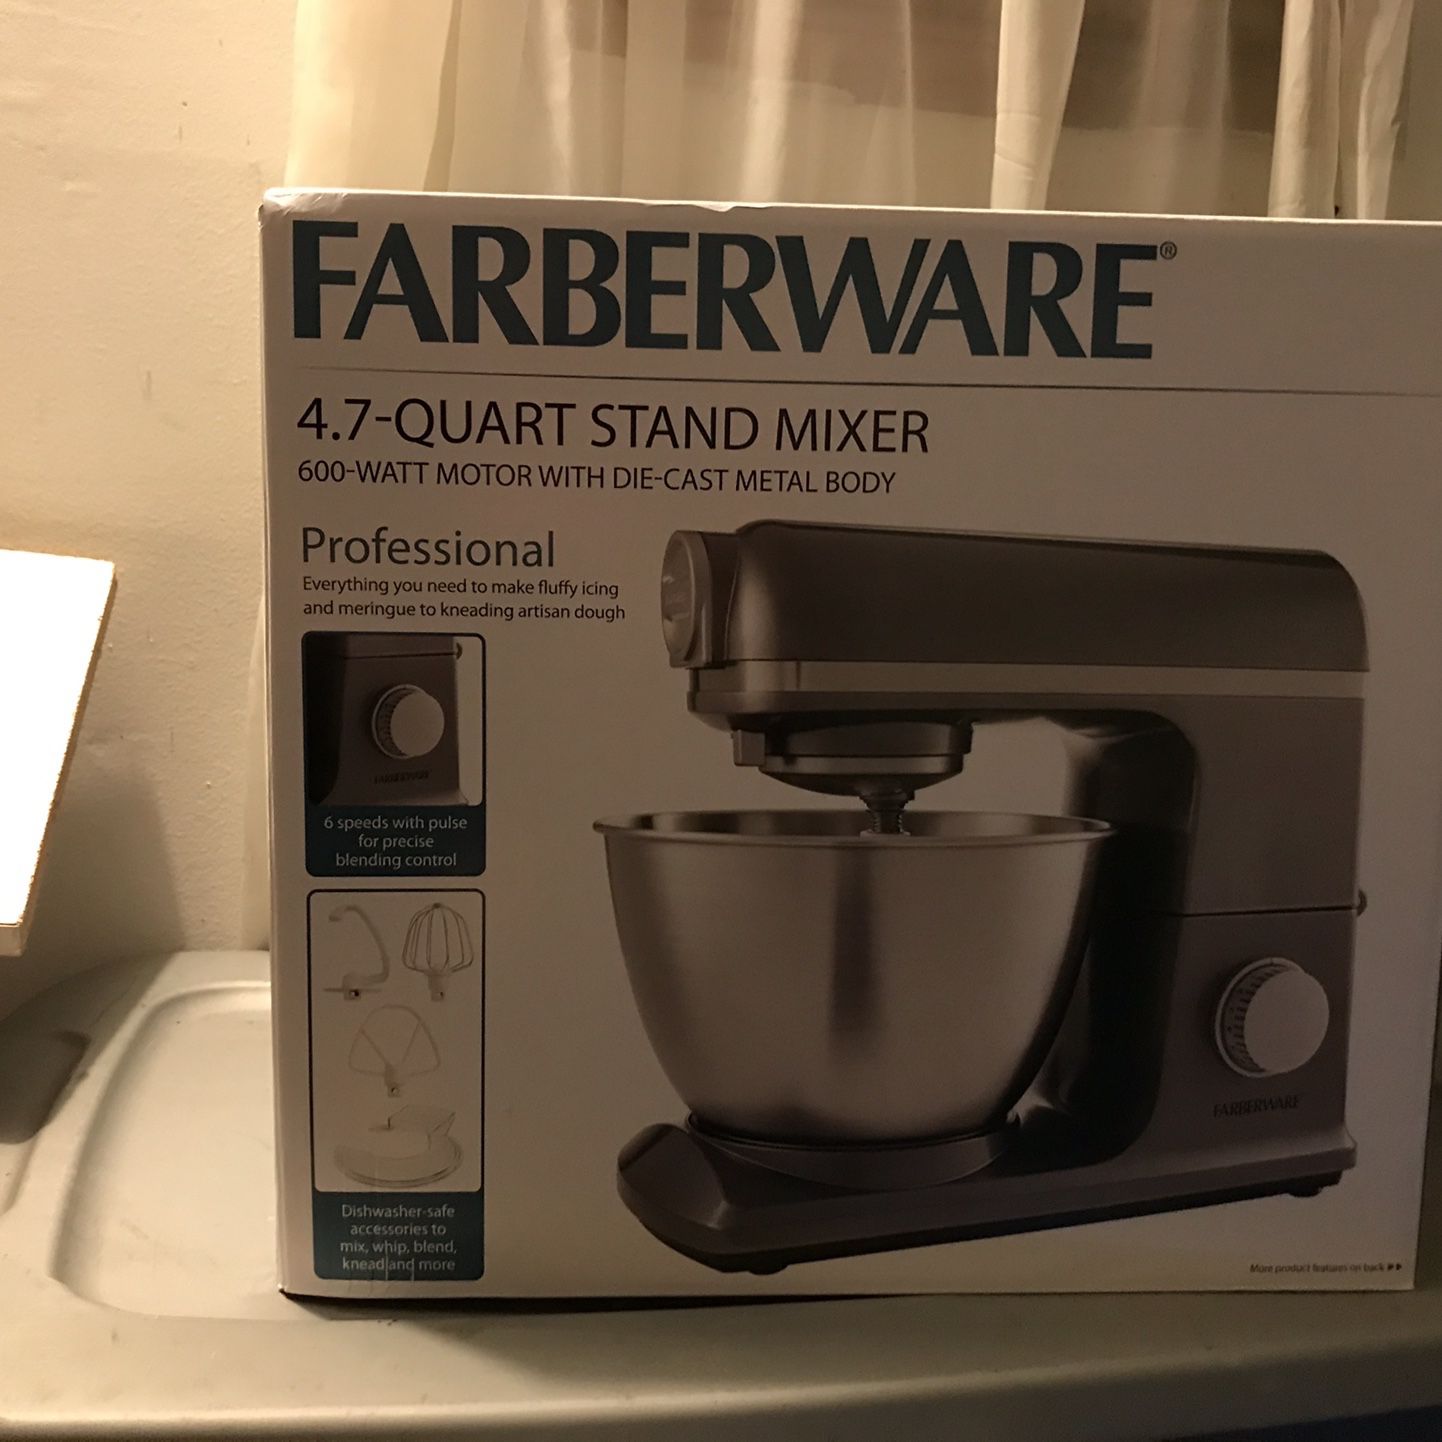 Farberware 4.7q Stand Mixer for Sale in Louisville, KY - OfferUp